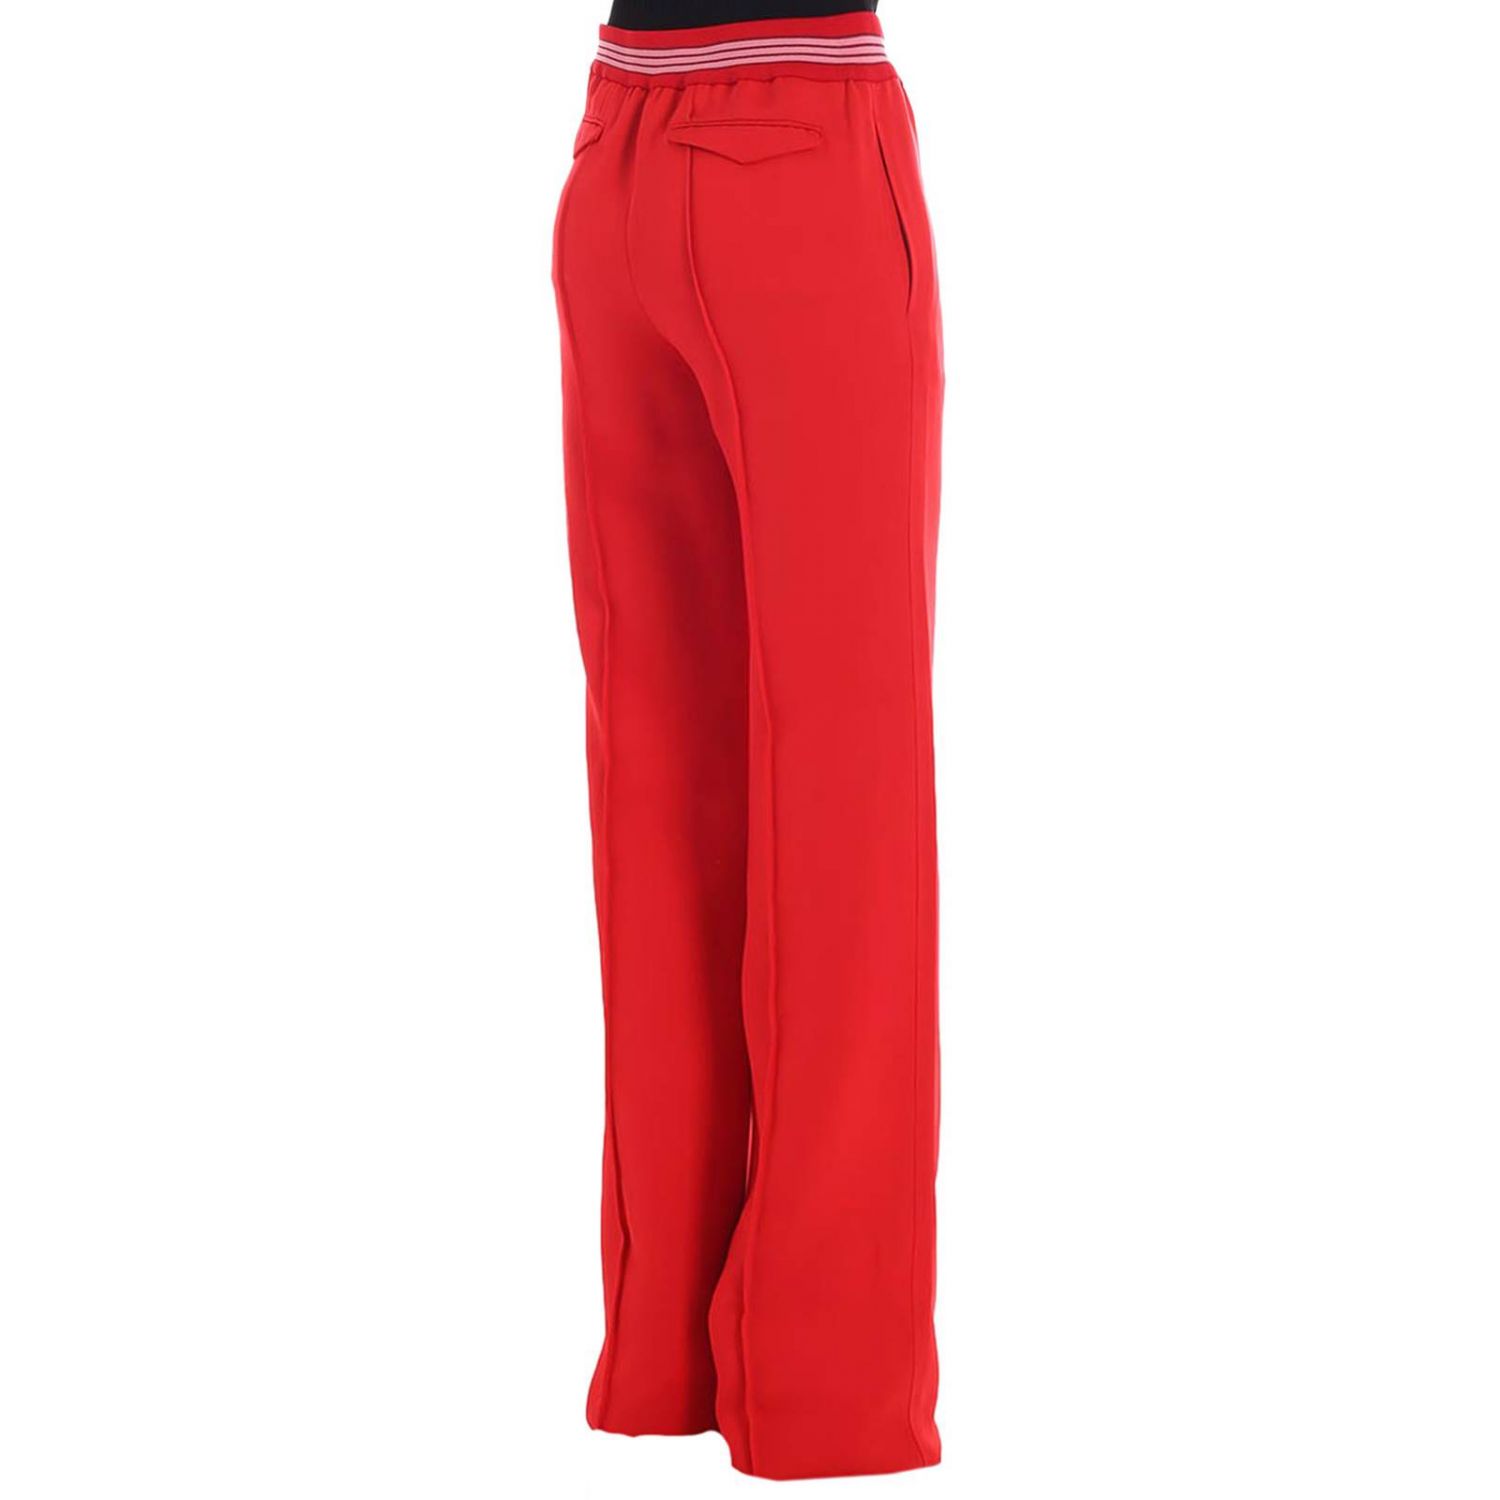 Valentino Outlet: Pants women - Red | Pants Valentino PB3RB1X1 3PL ...